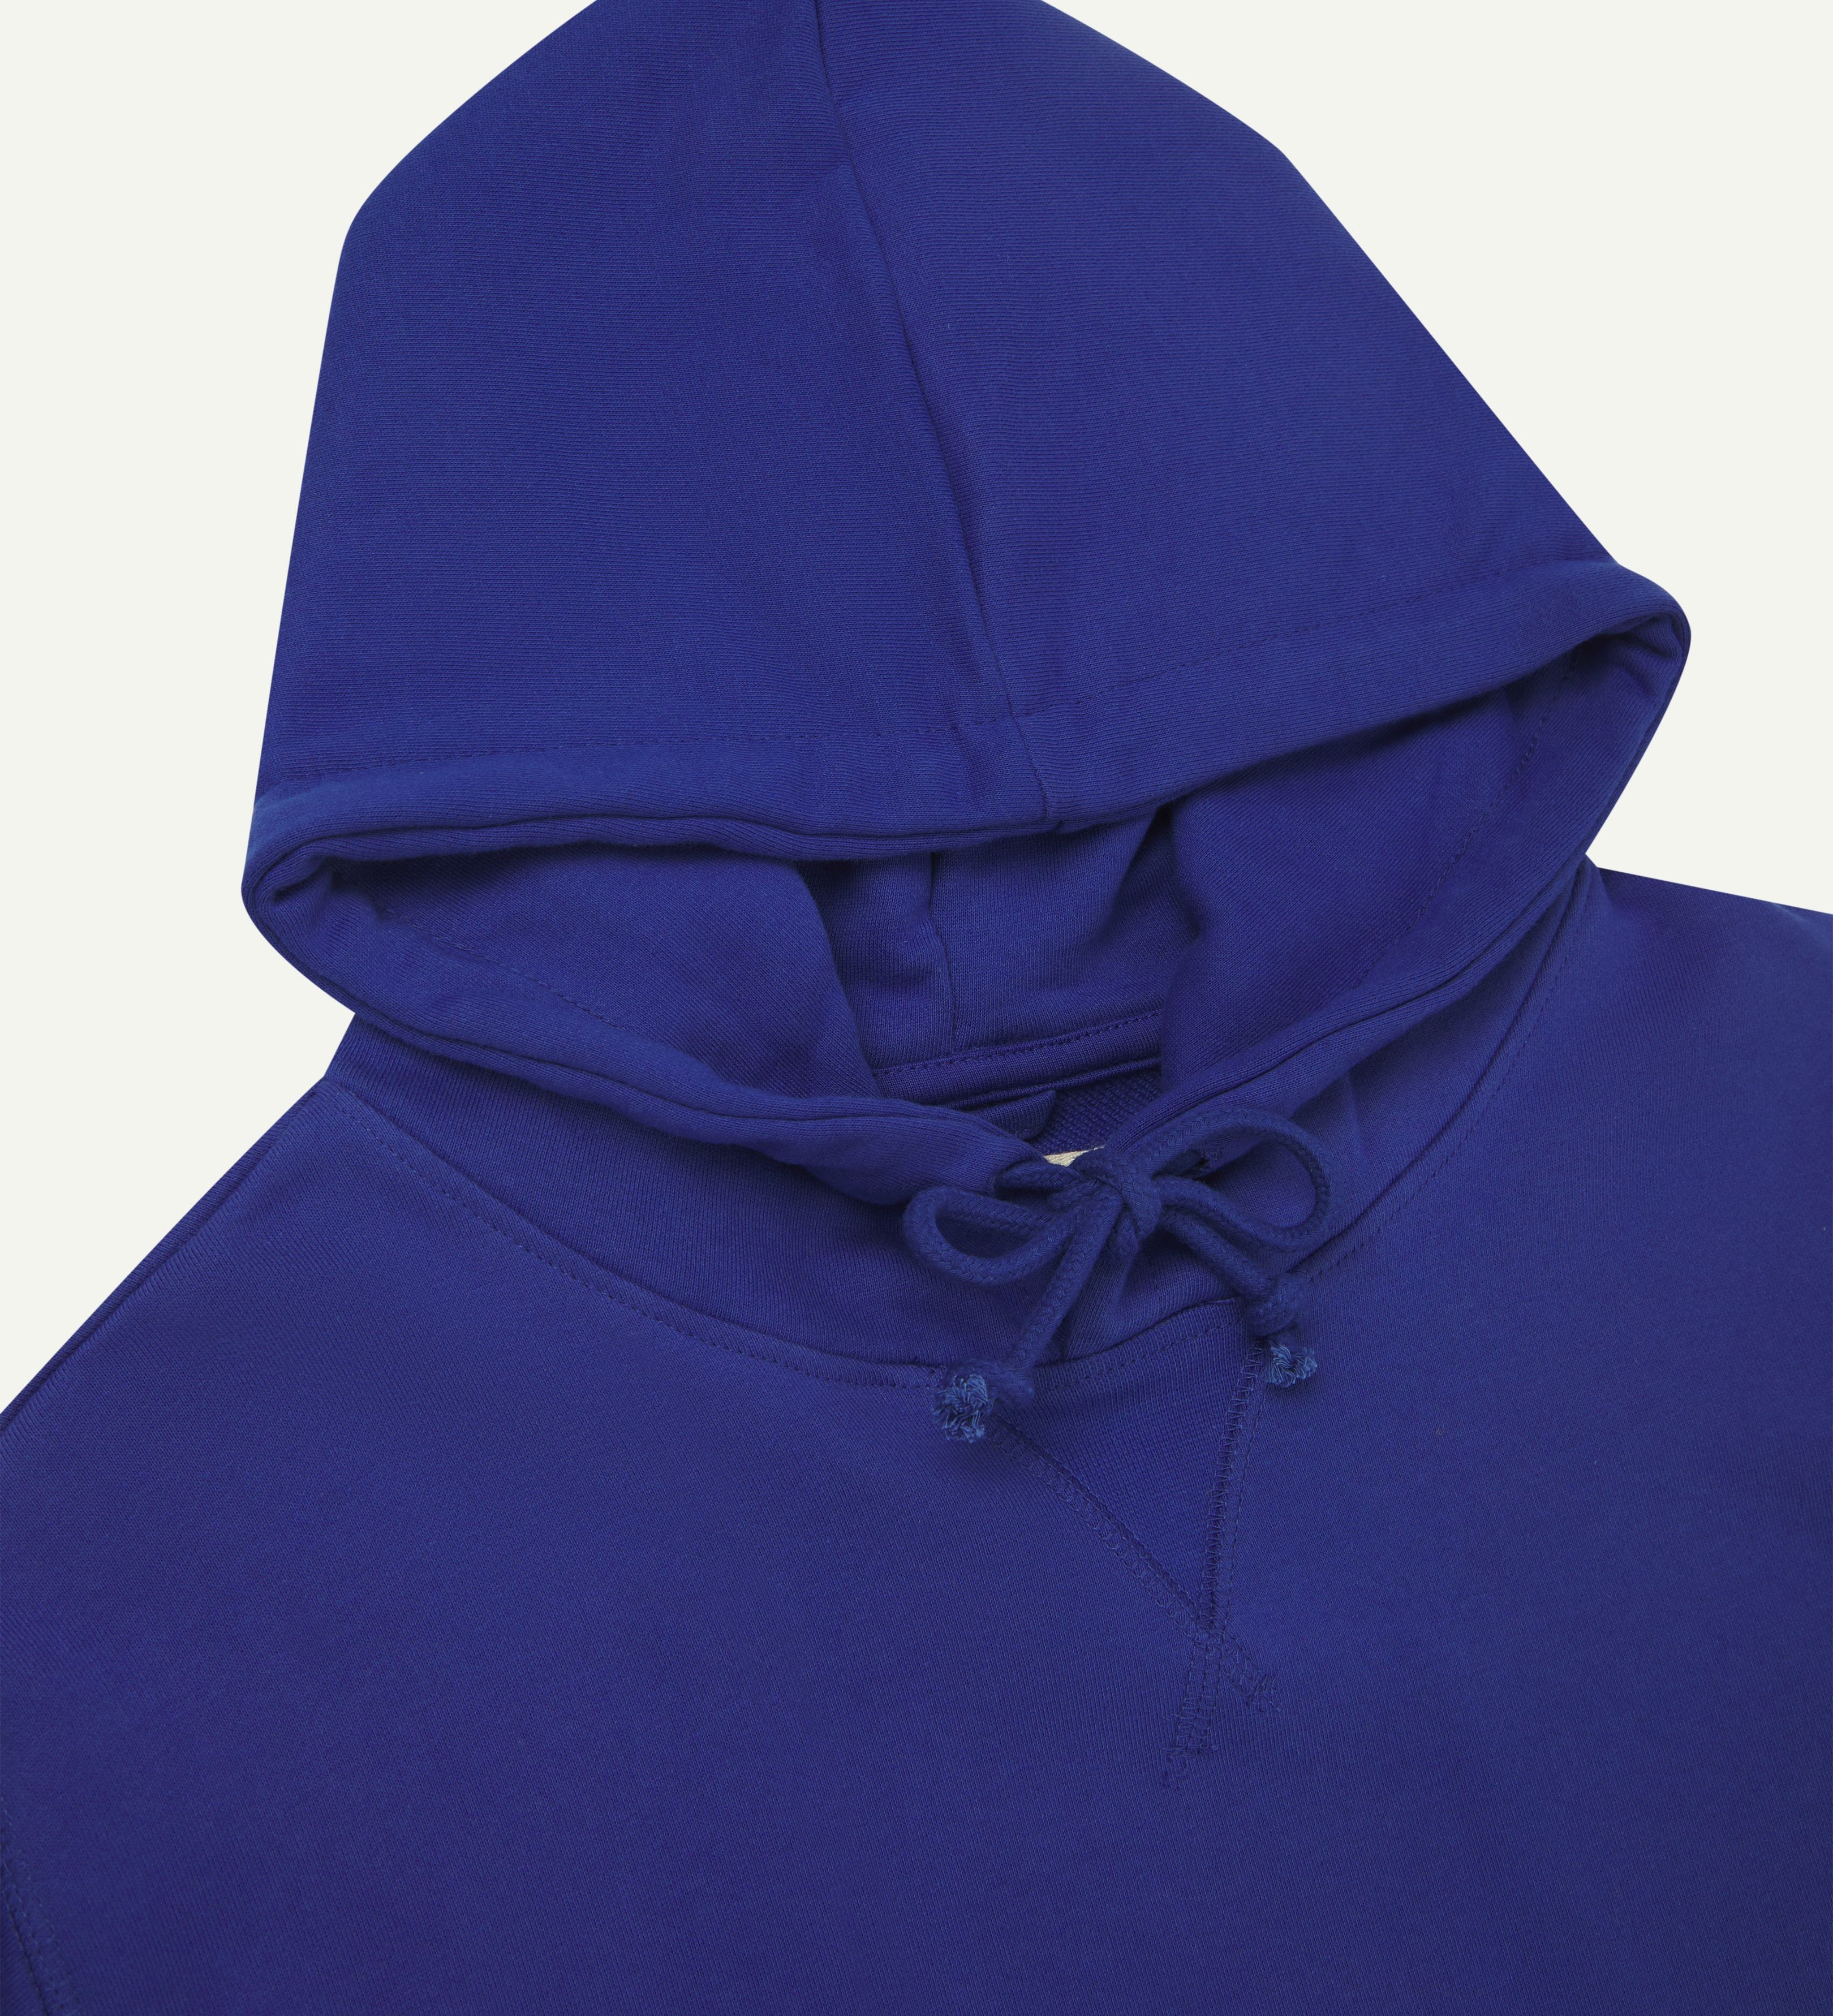 Front view of vivid ultra blue organic heavyweight cotton #7004 jersey hooded sweatshirt by Uskees showing hood tie detail